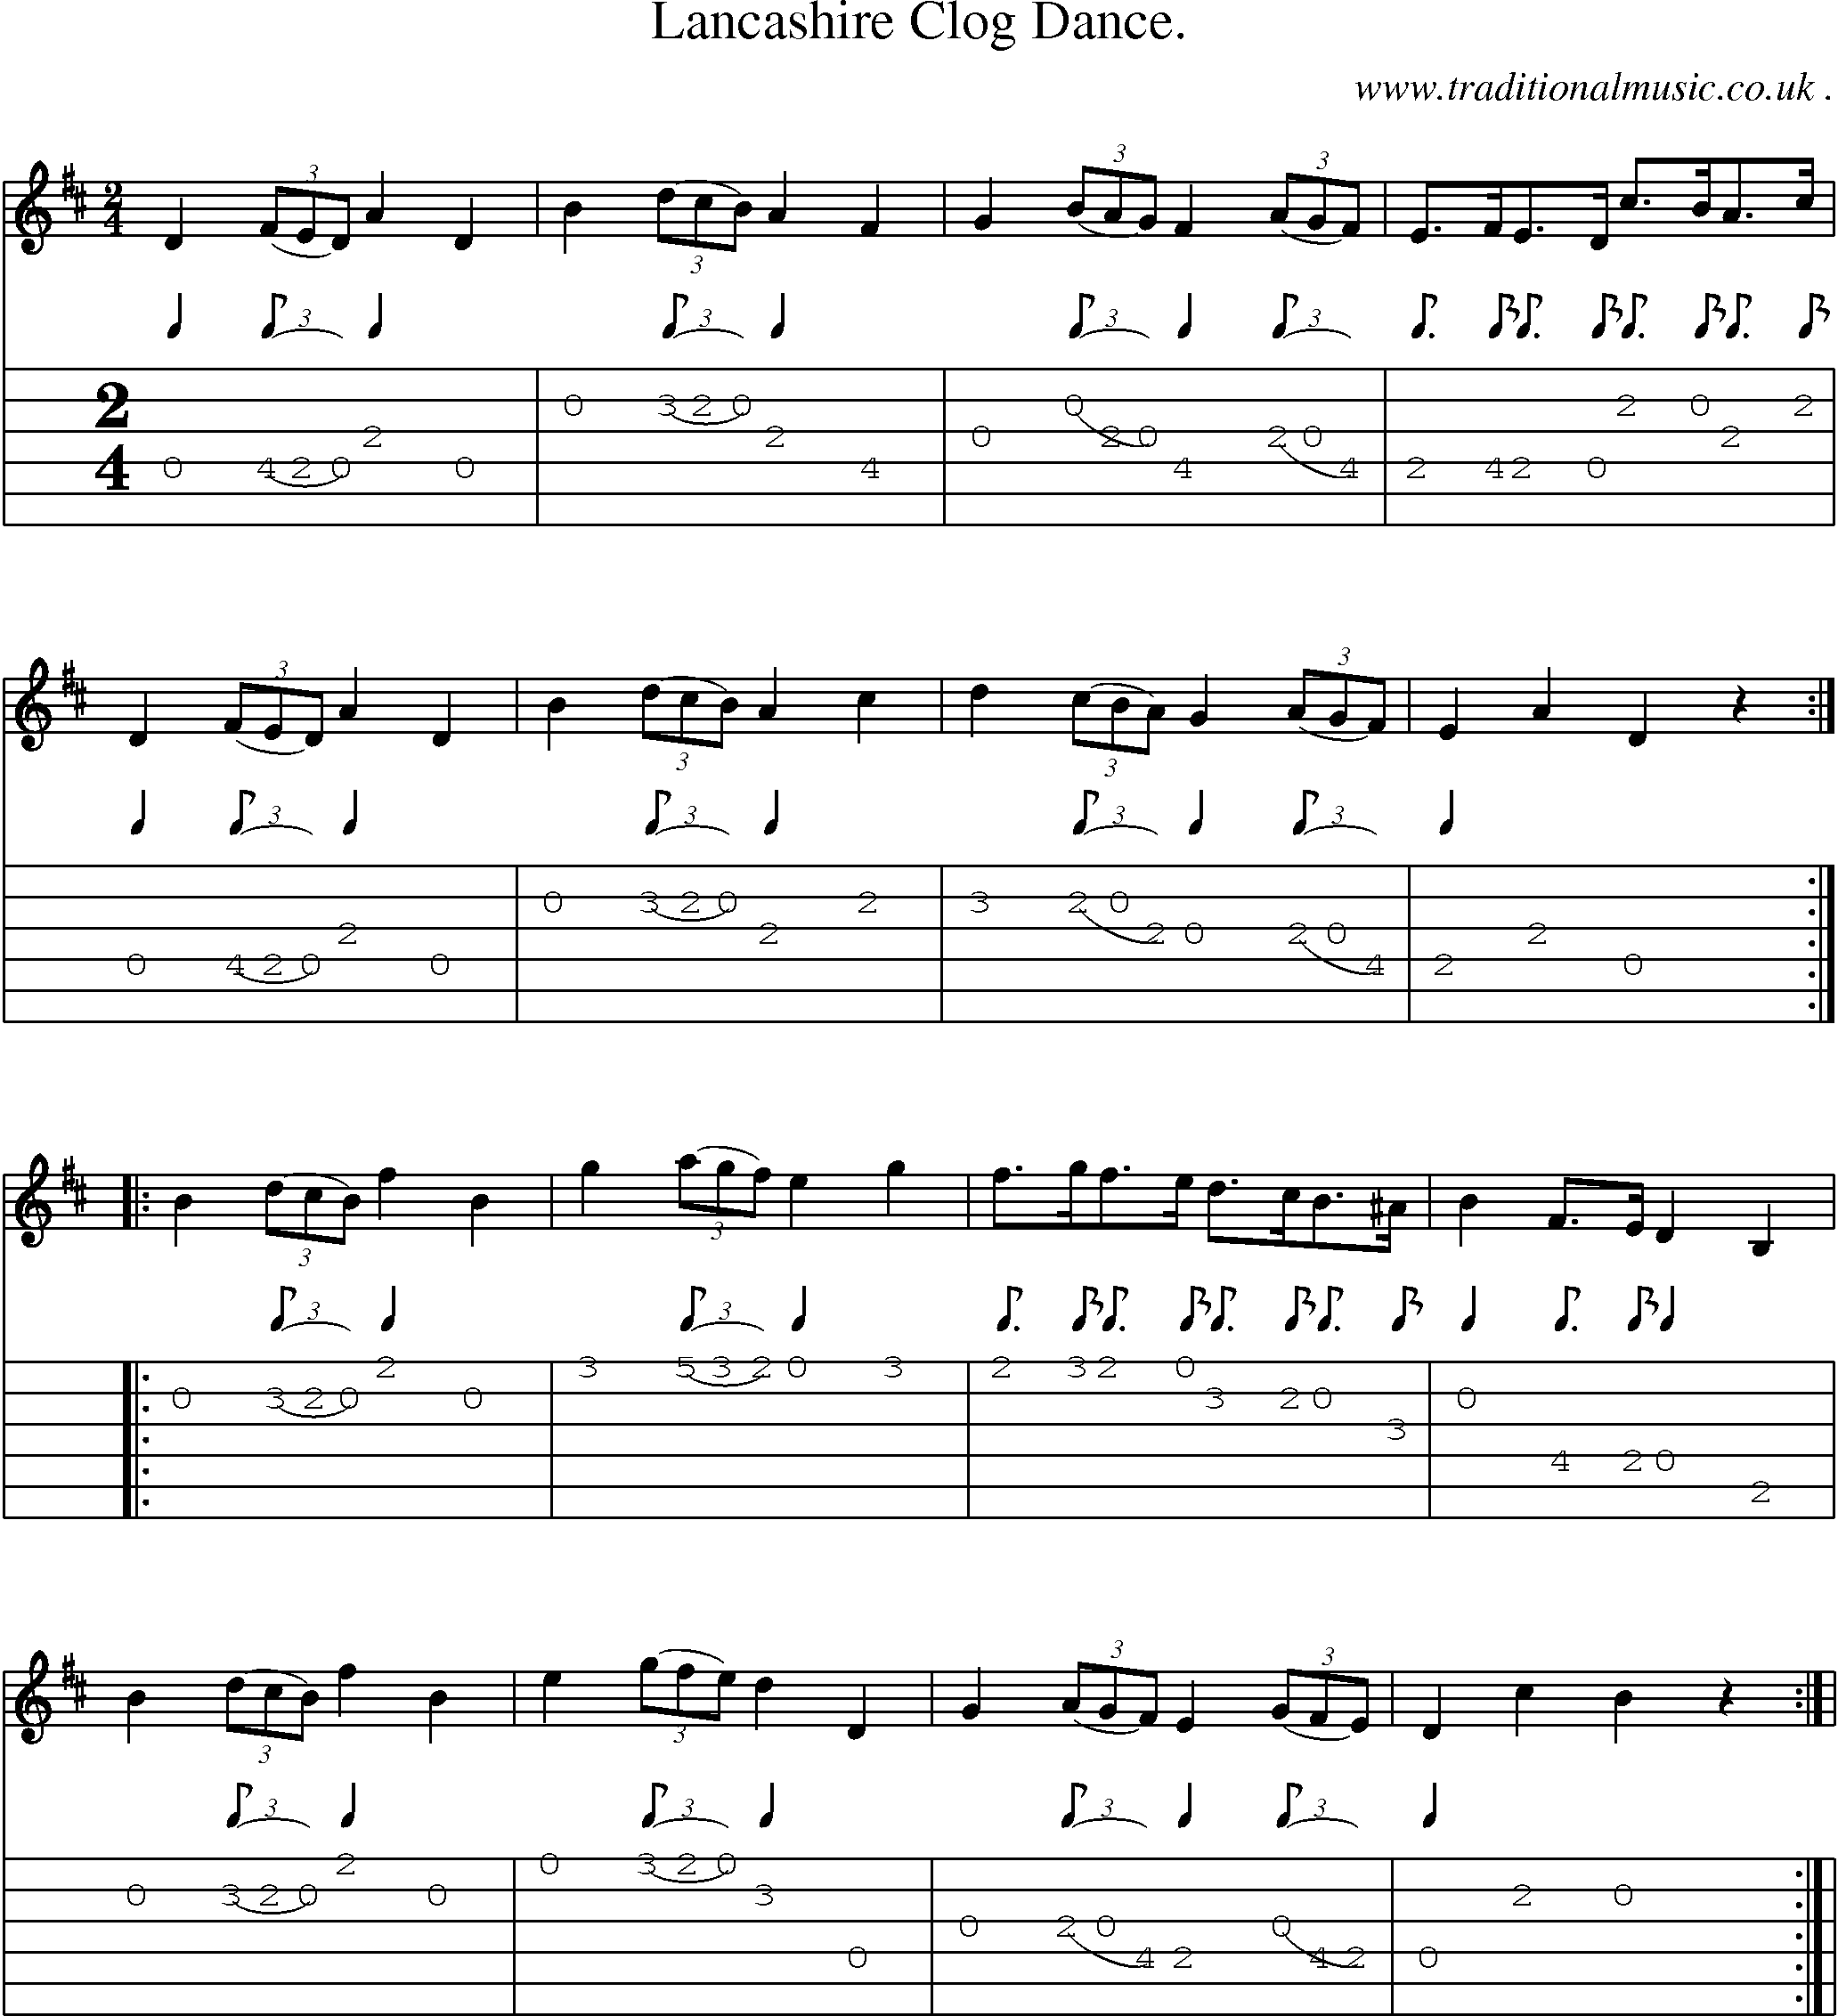 Sheet-Music and Guitar Tabs for Lancashire Clog Dance